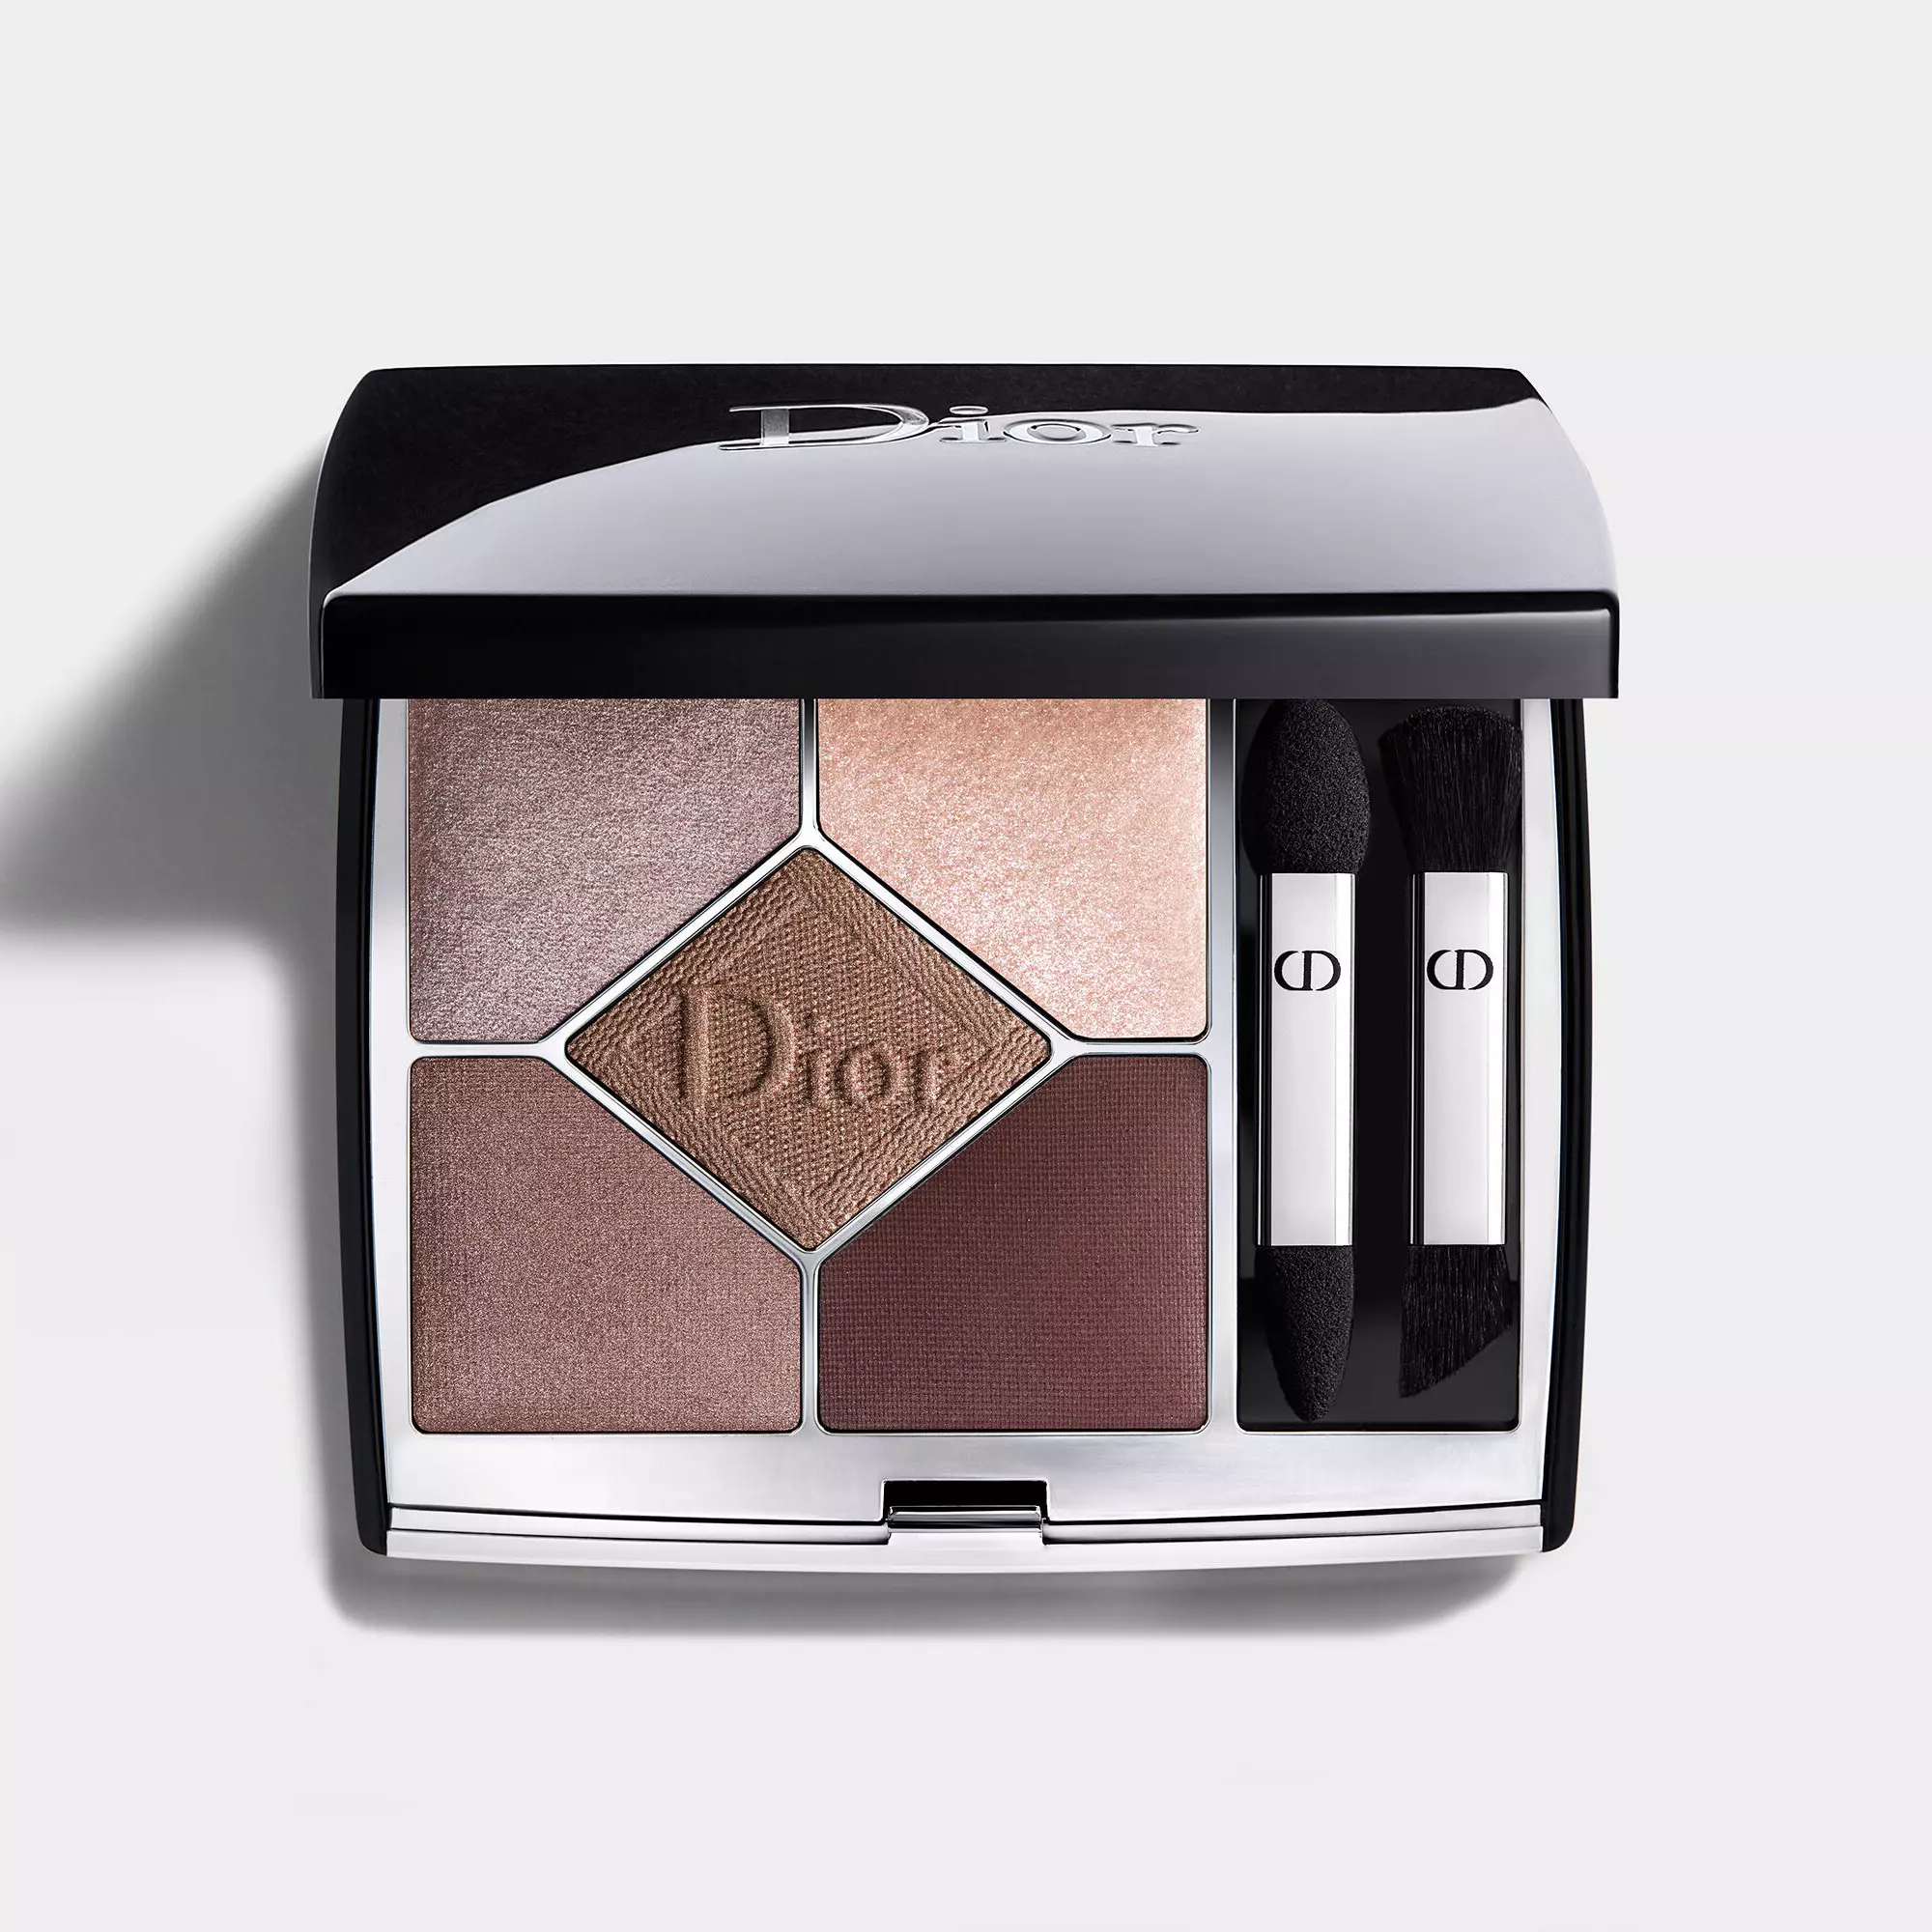 Dior 5 Couleurs Couture Eyeshadow Palette Soft Cashmere 669